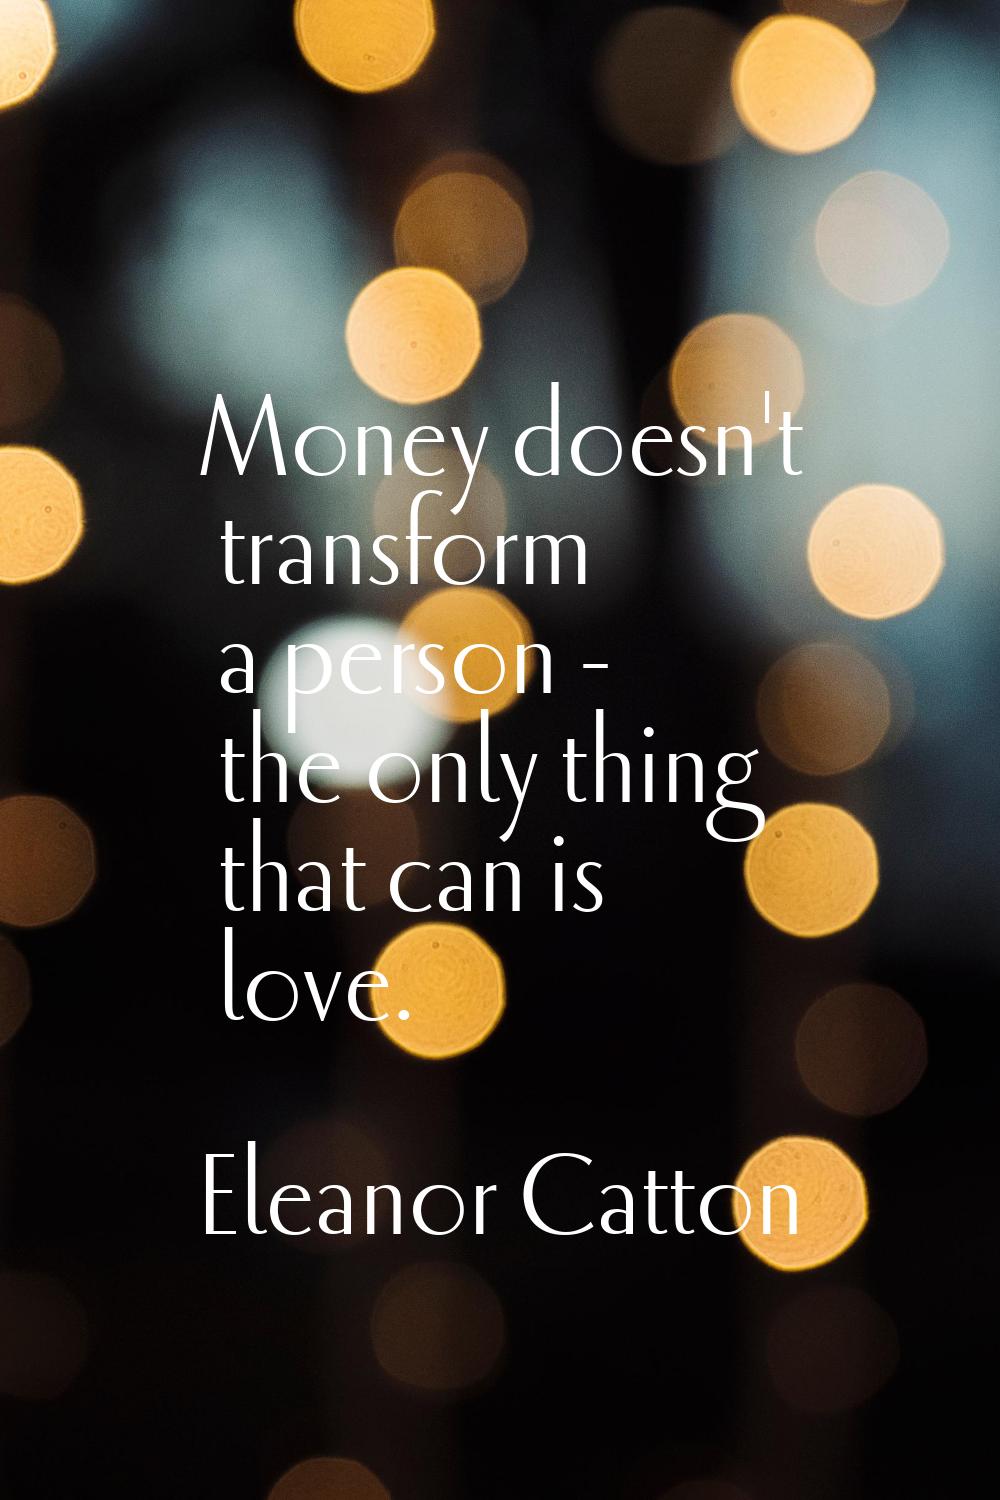 Money doesn't transform a person - the only thing that can is love.